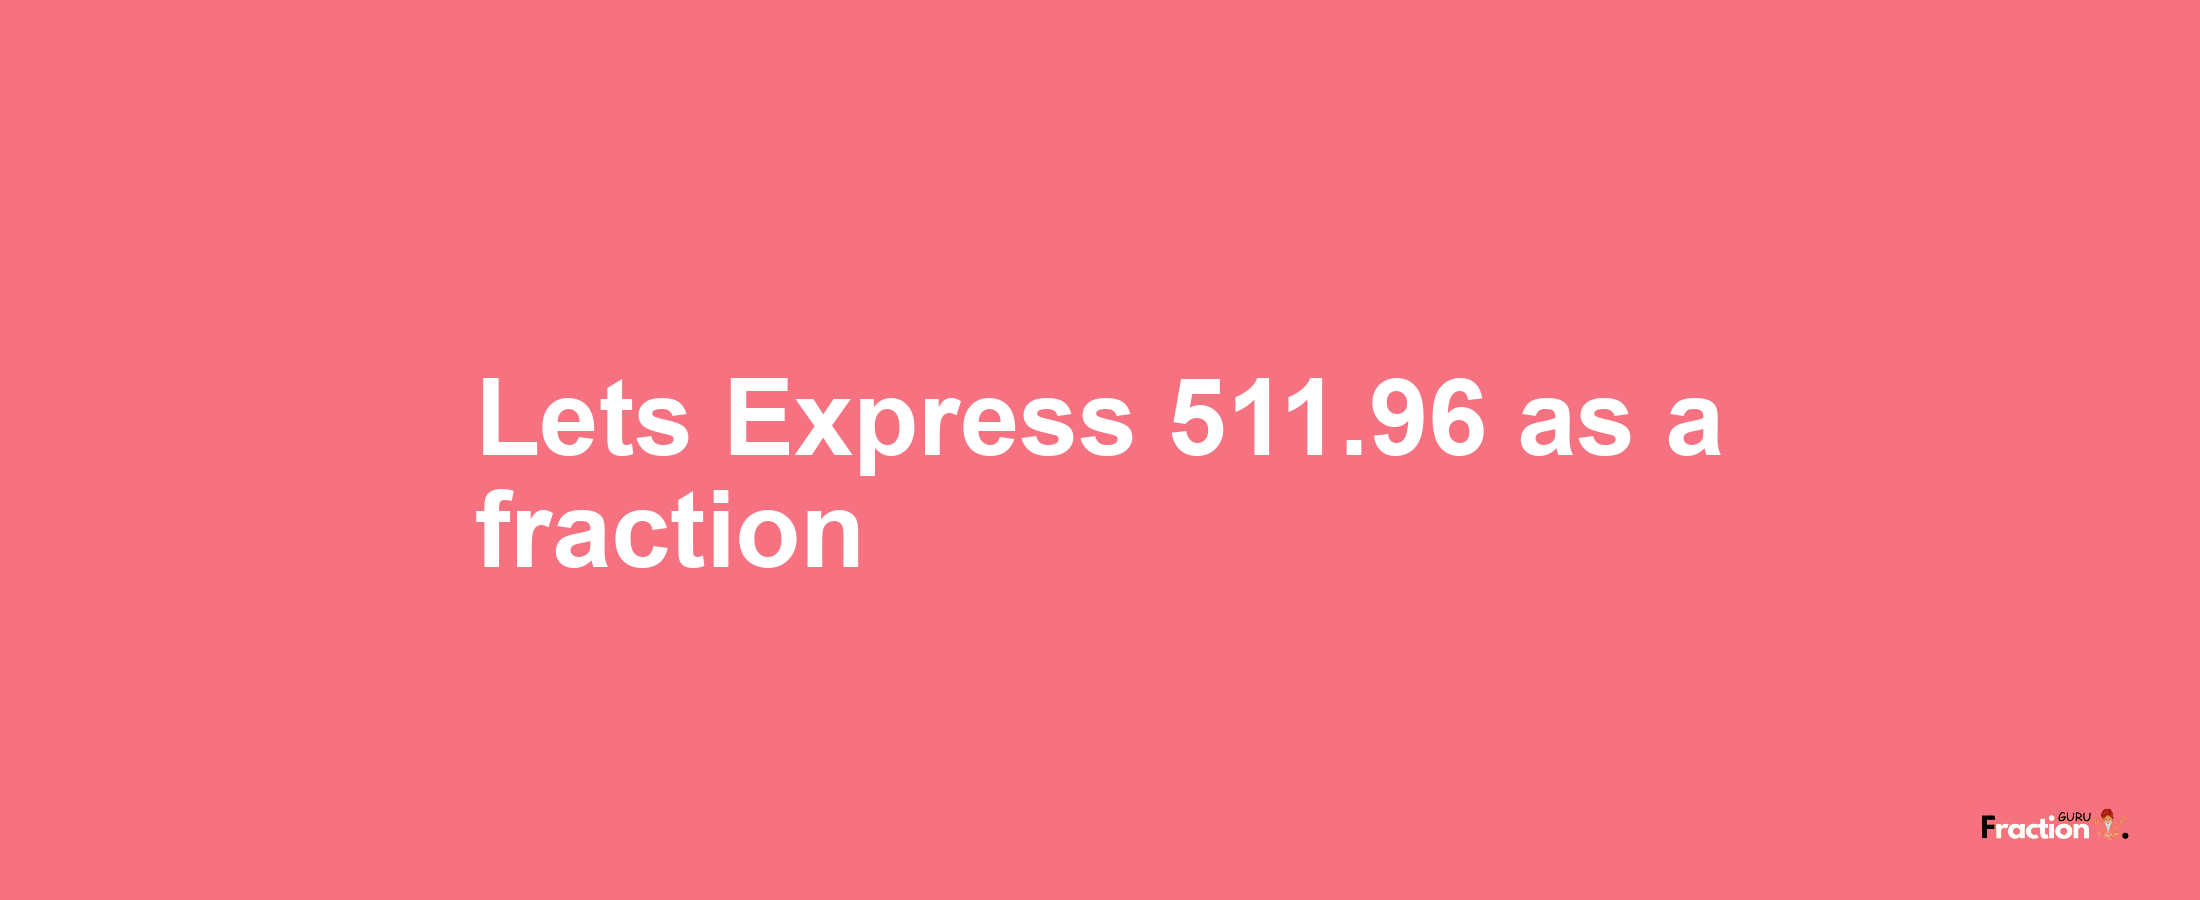 Lets Express 511.96 as afraction